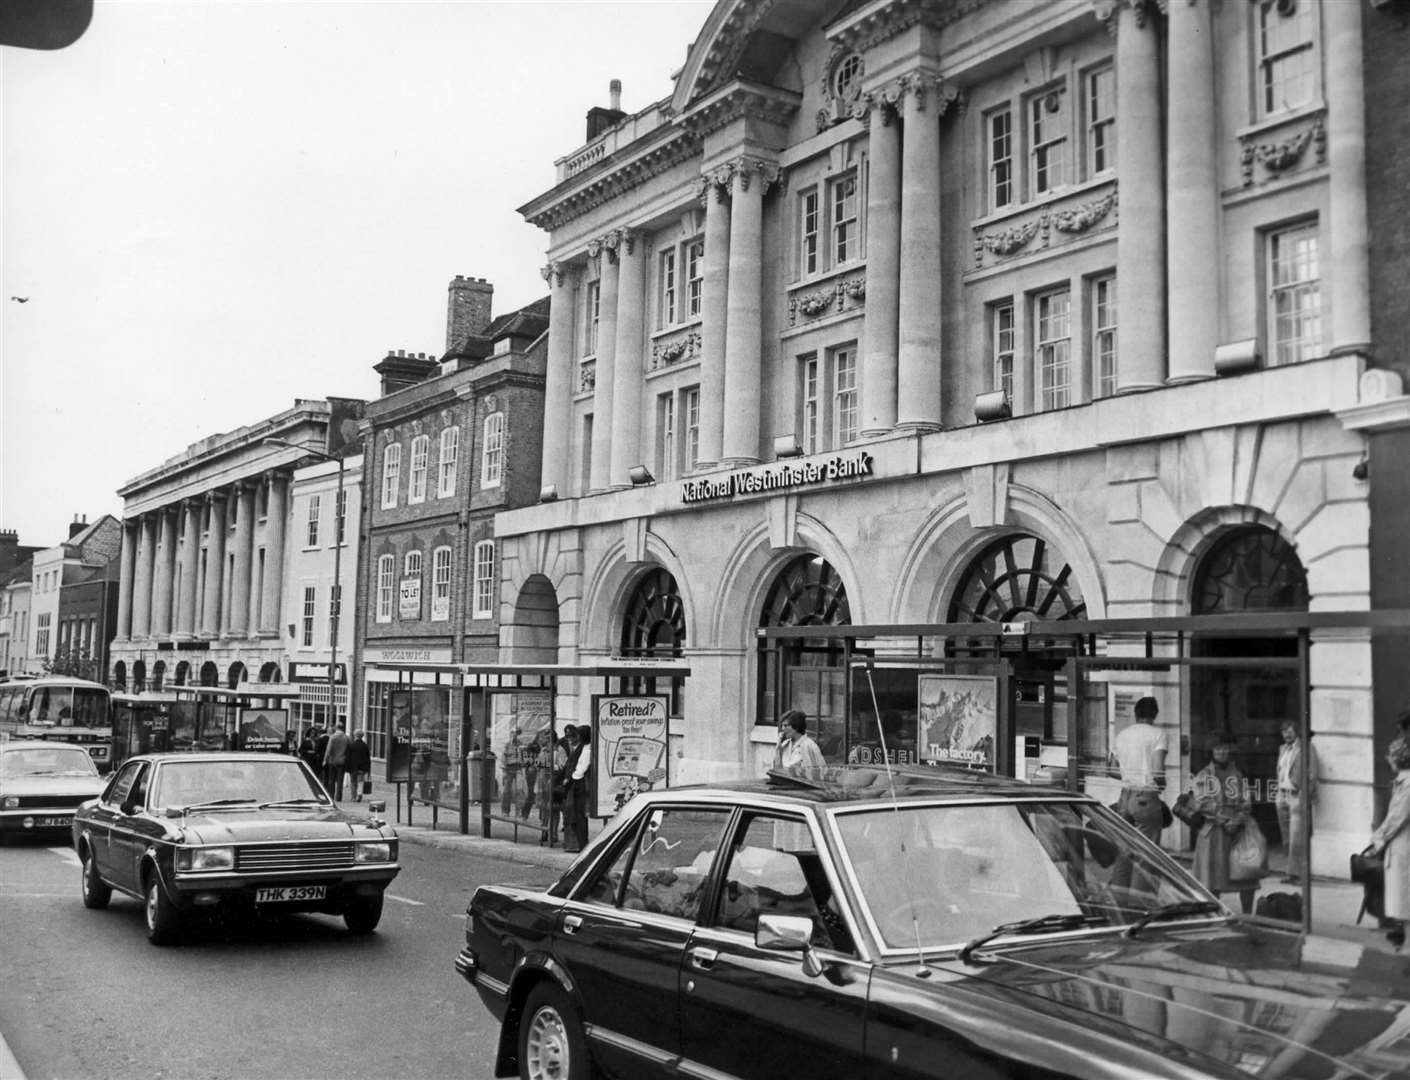 The National Westminster Bank in Maidstone High Street in September 1980 - today known as Natwest